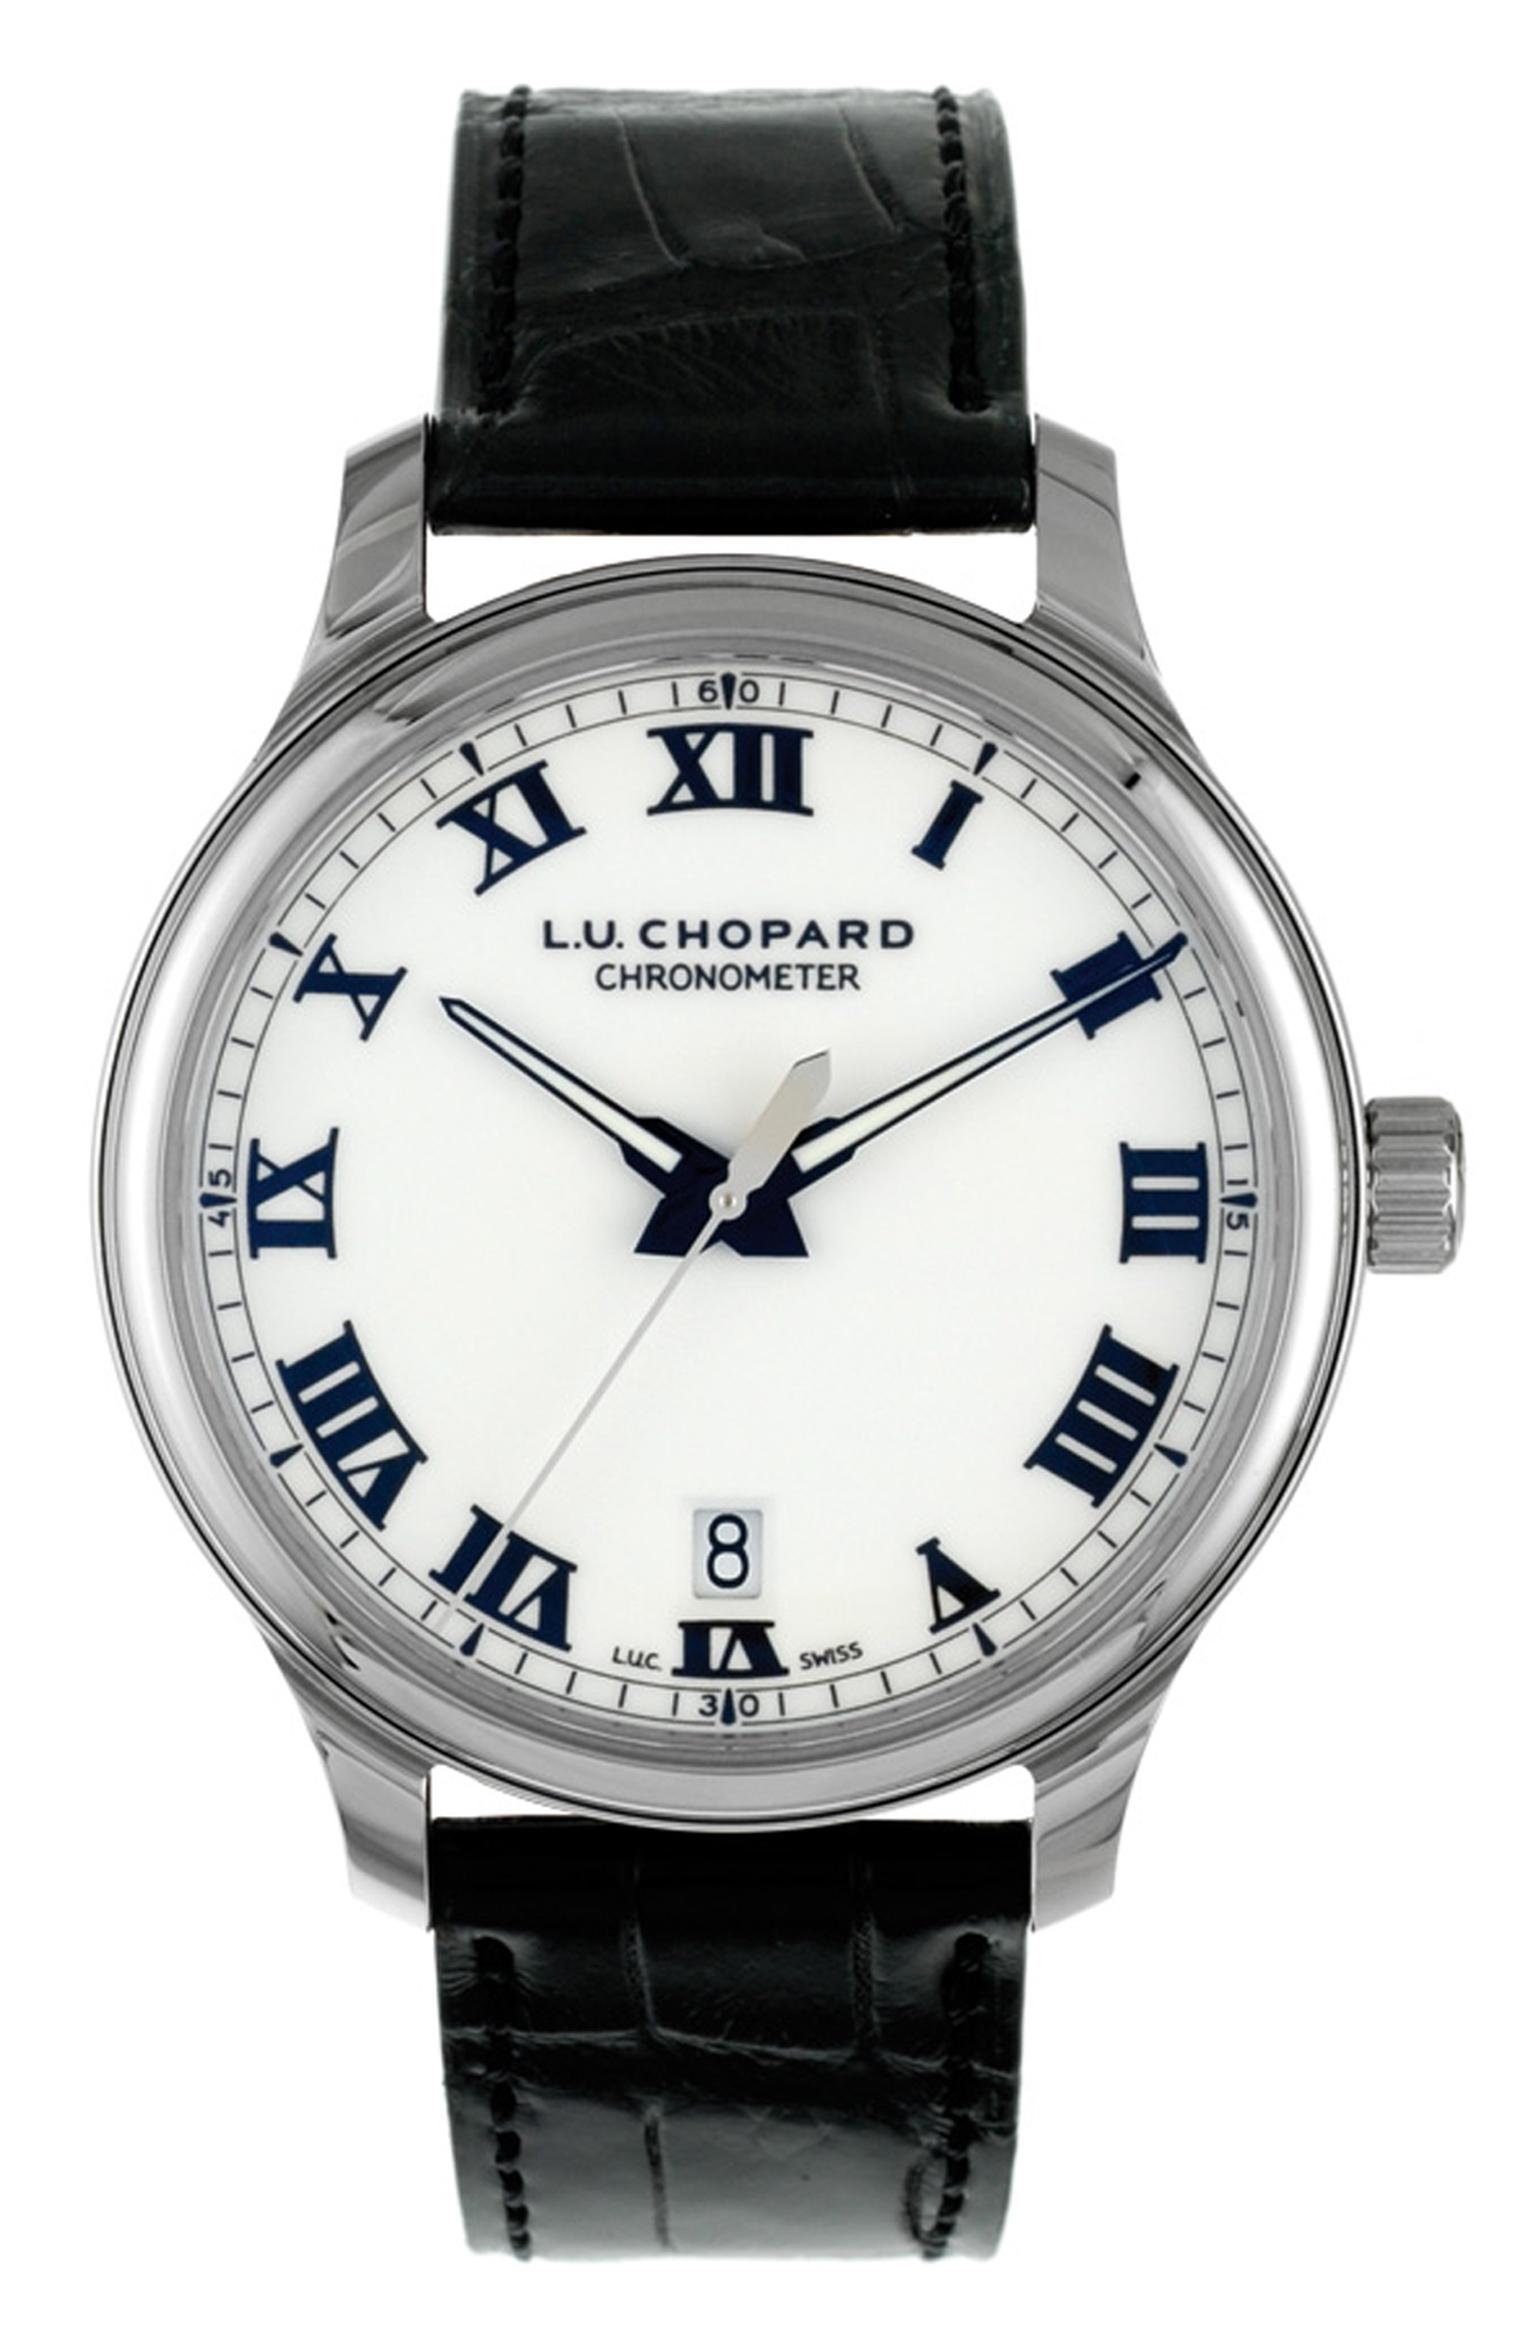 The stainless steel Chopard L.U.C 1937 Classic timepiece worn by Bradley Cooper to the 2014 Oscars